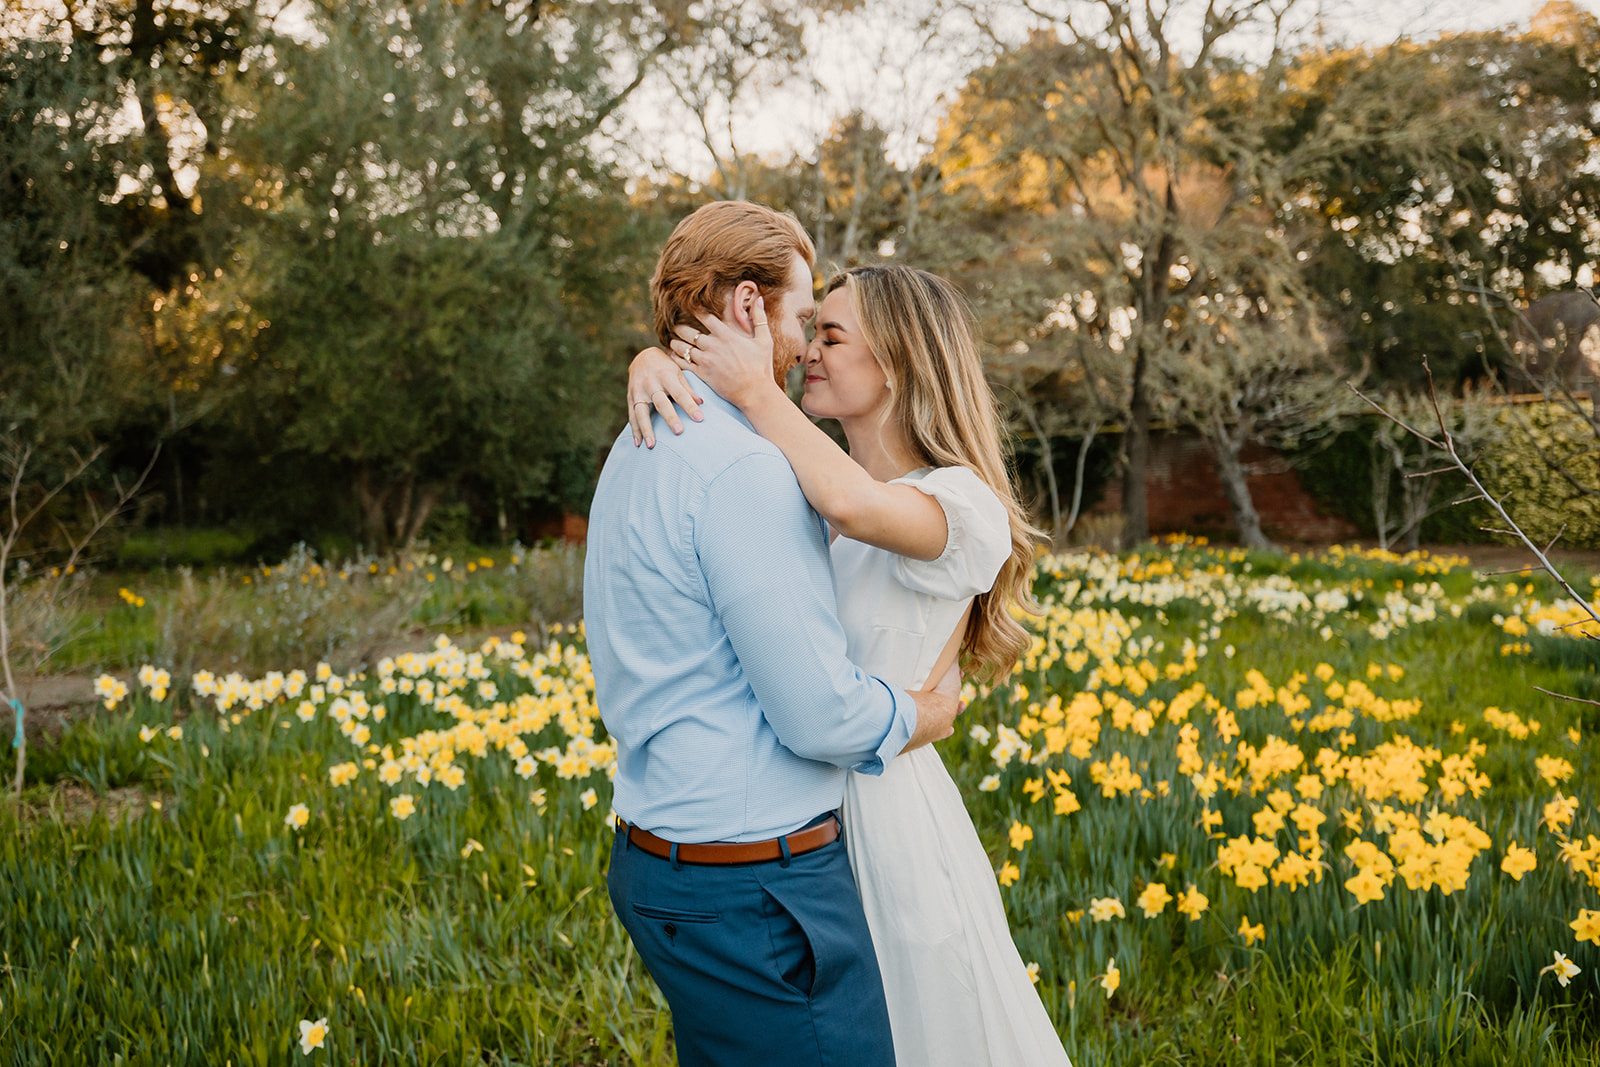 A couple embracing and smiling at, taking their engagement photos, both dressed in casual attire.